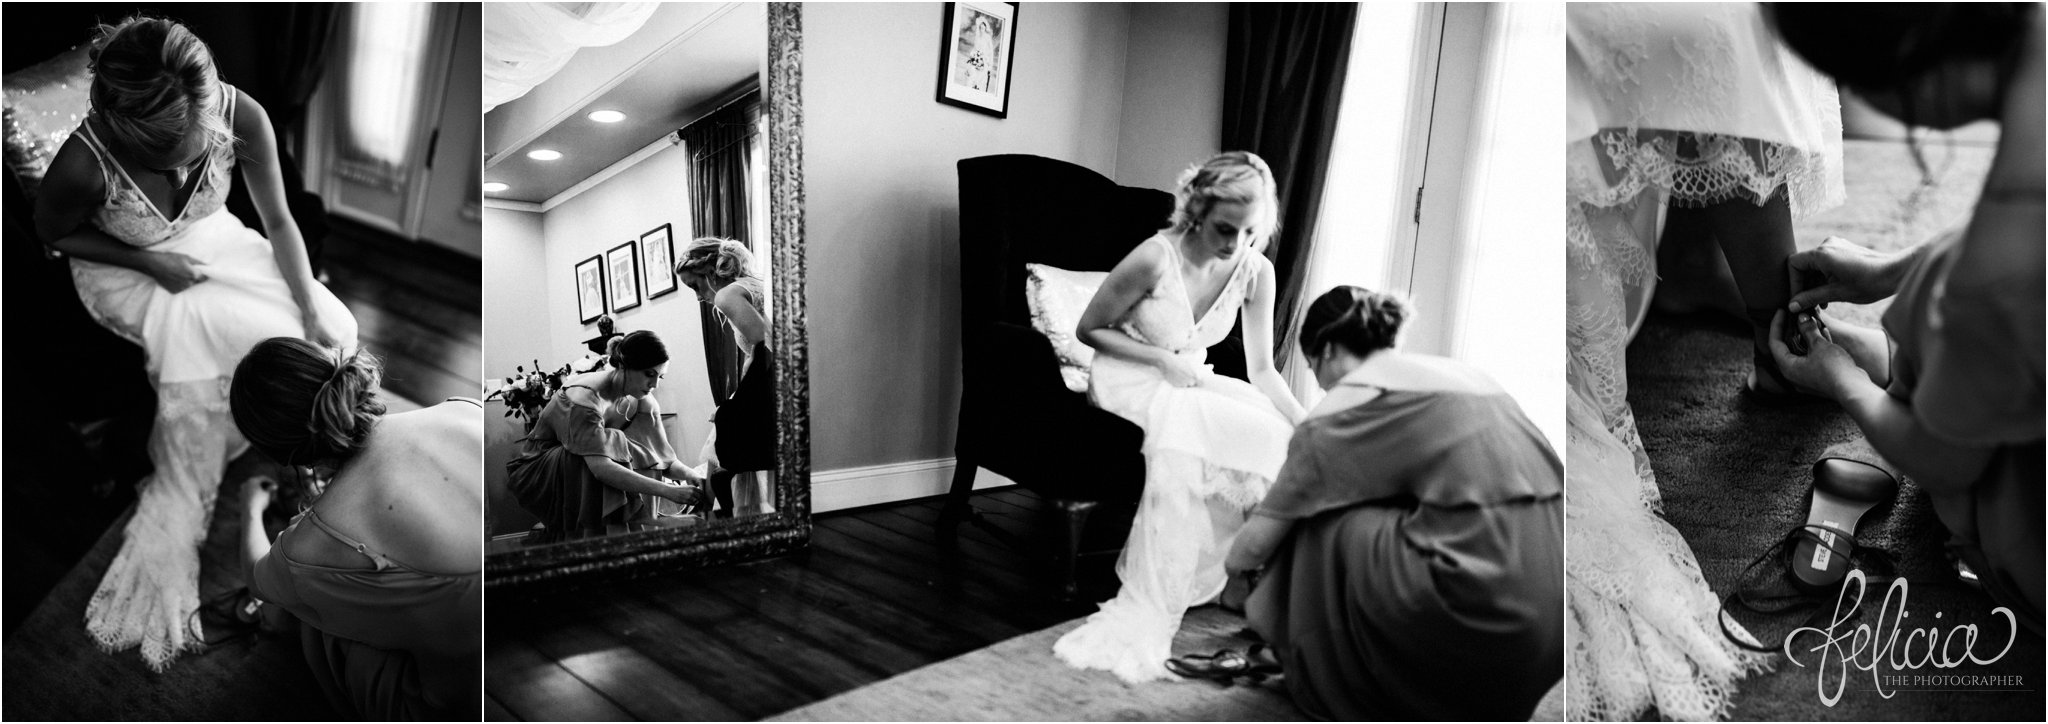 images by feliciathephotographer.com | destination wedding | the makey house | dave gibson coordinator | travel photographer | Savannah, georgia | southern | getting ready | details | black and white | putting on shoes | mirror | reflection | bridesmaid 